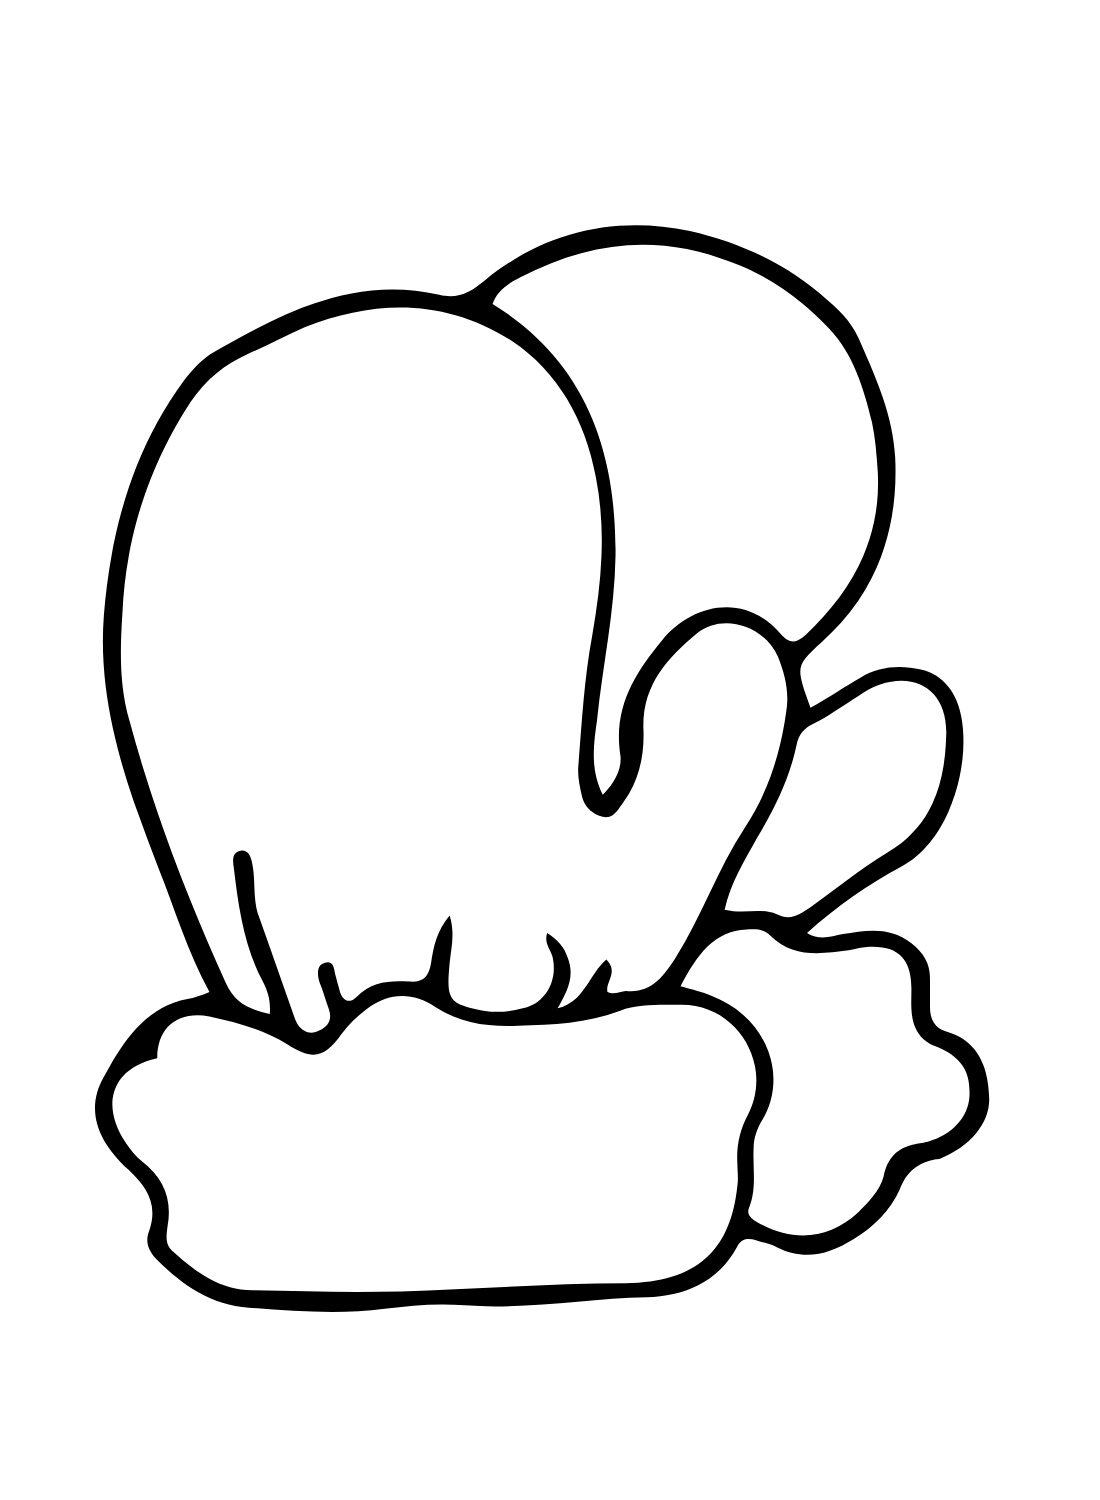 Free Mittens Images Coloring Page